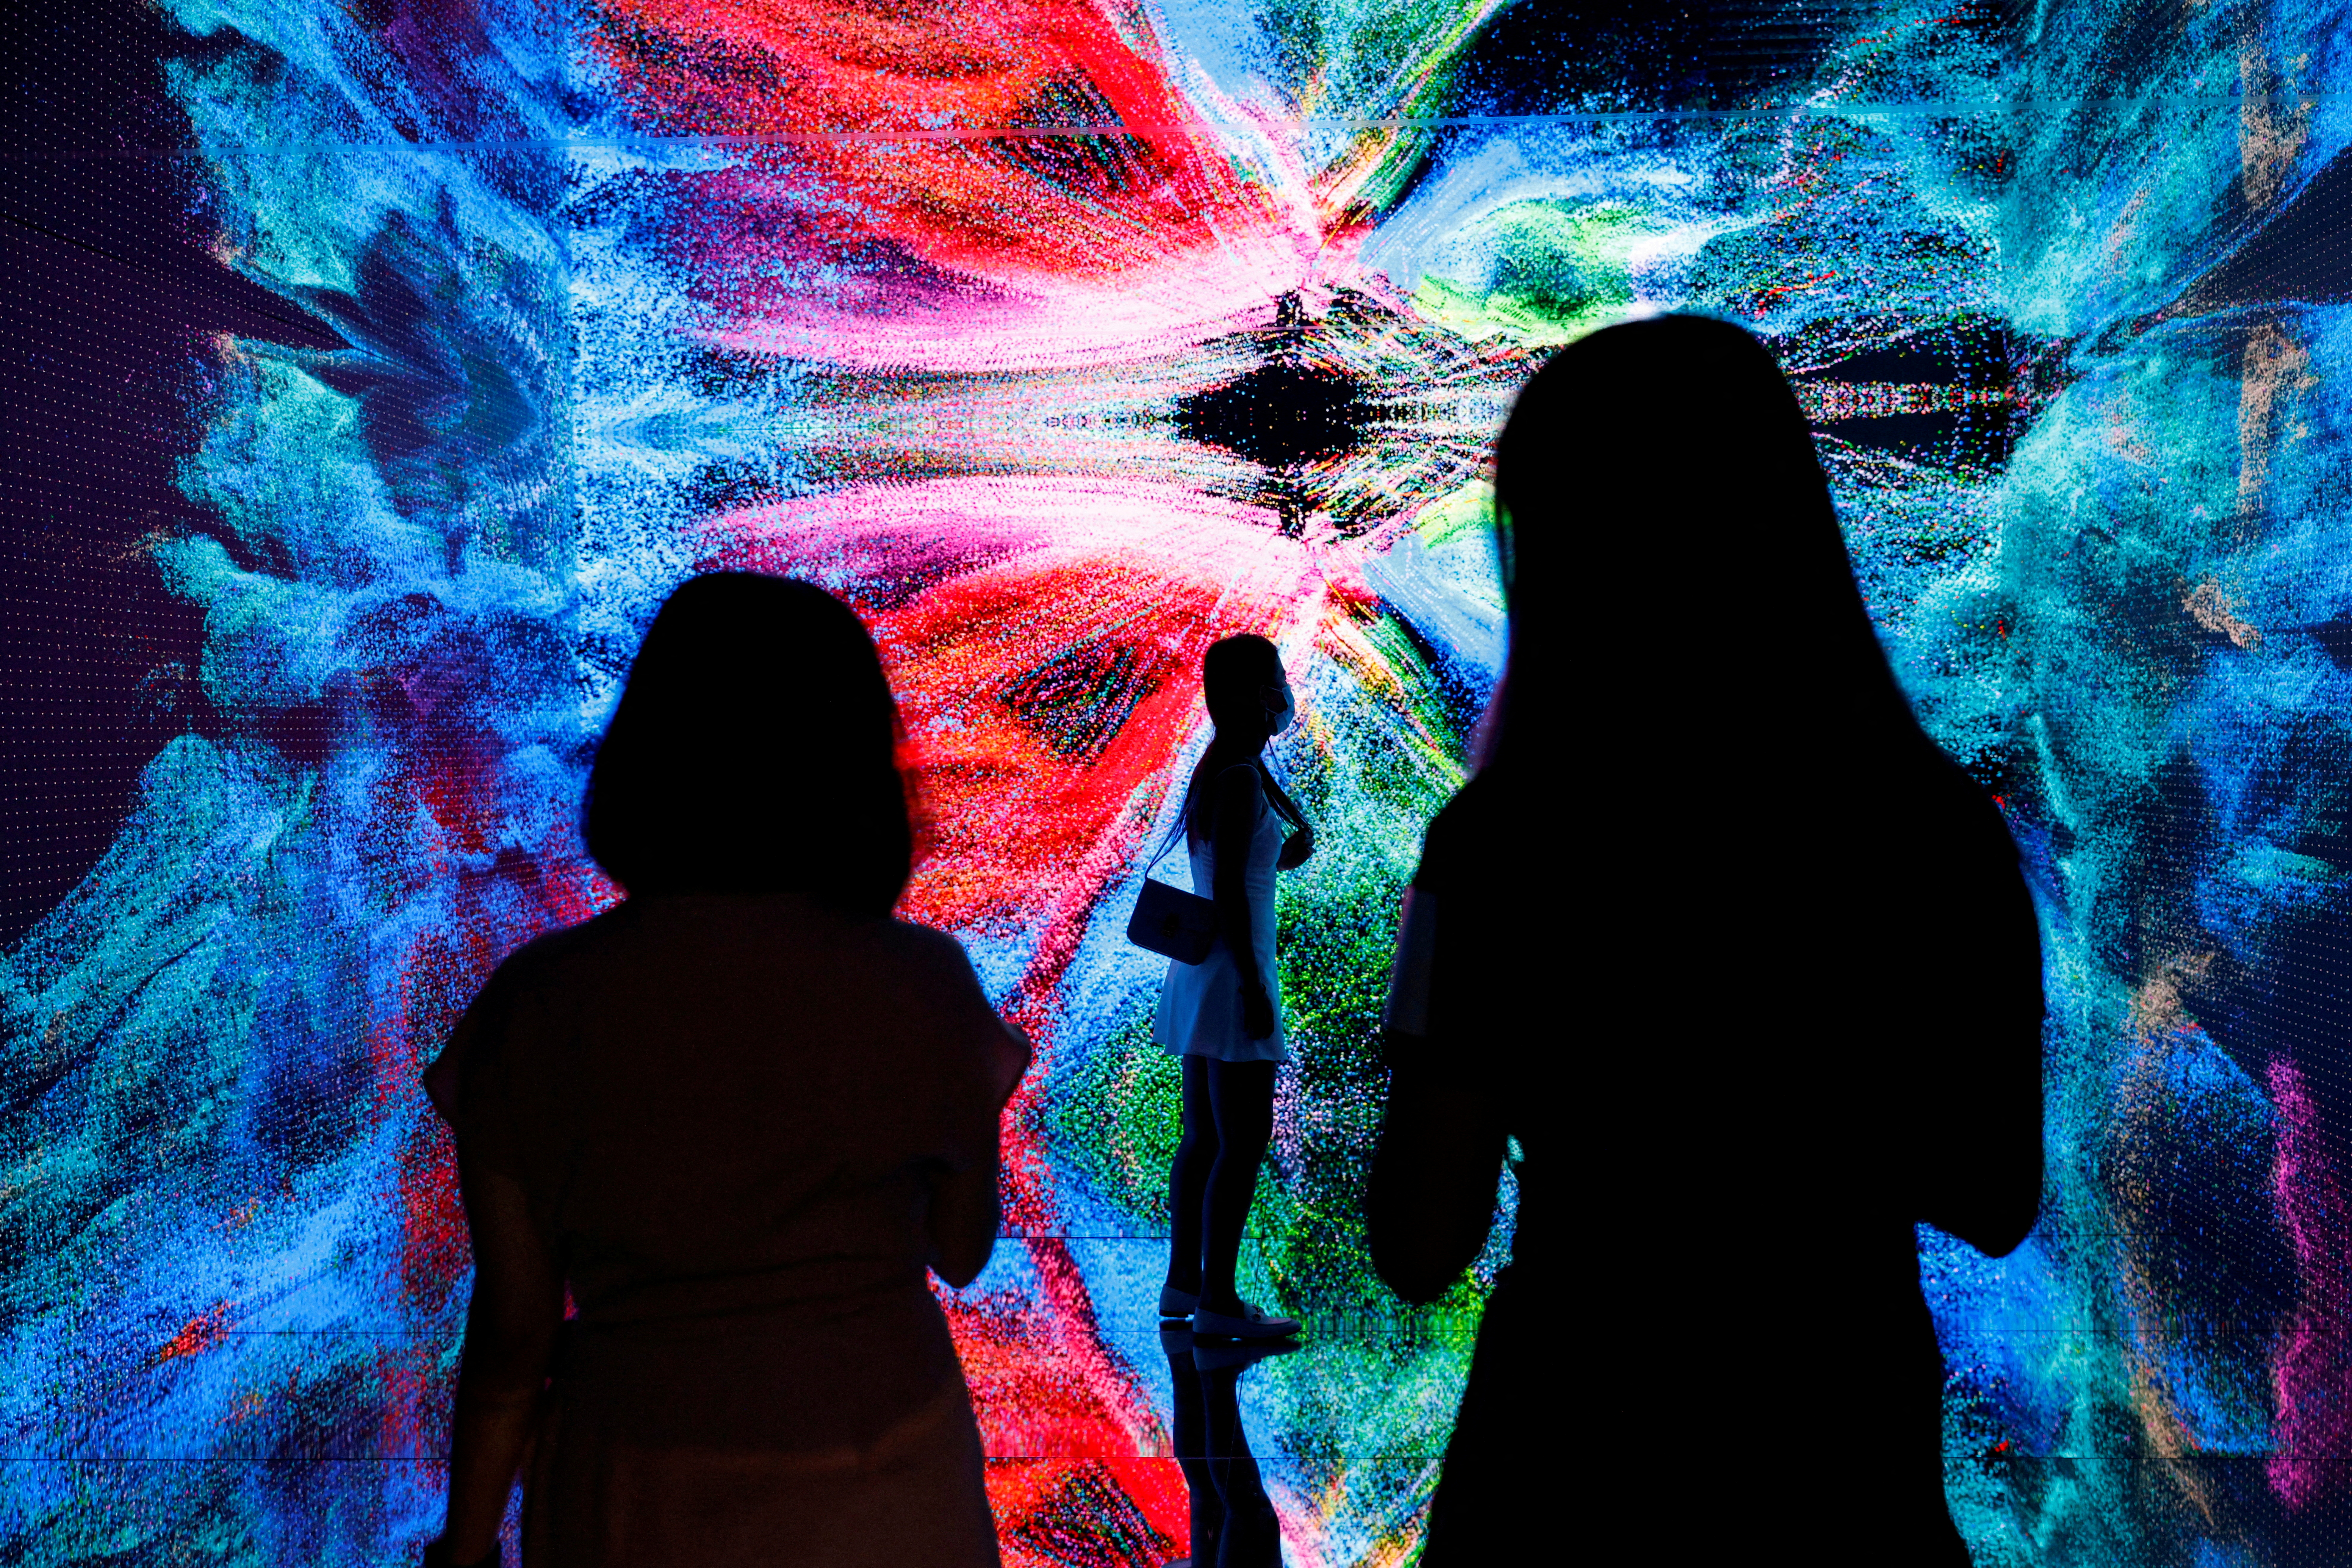 Visitors are pictured in front of an immersive art installation titled "Machine Hallucinations - Space: Metaverse" by media artist Refik Anadol at the Digital Art Fair, in Hong Kong